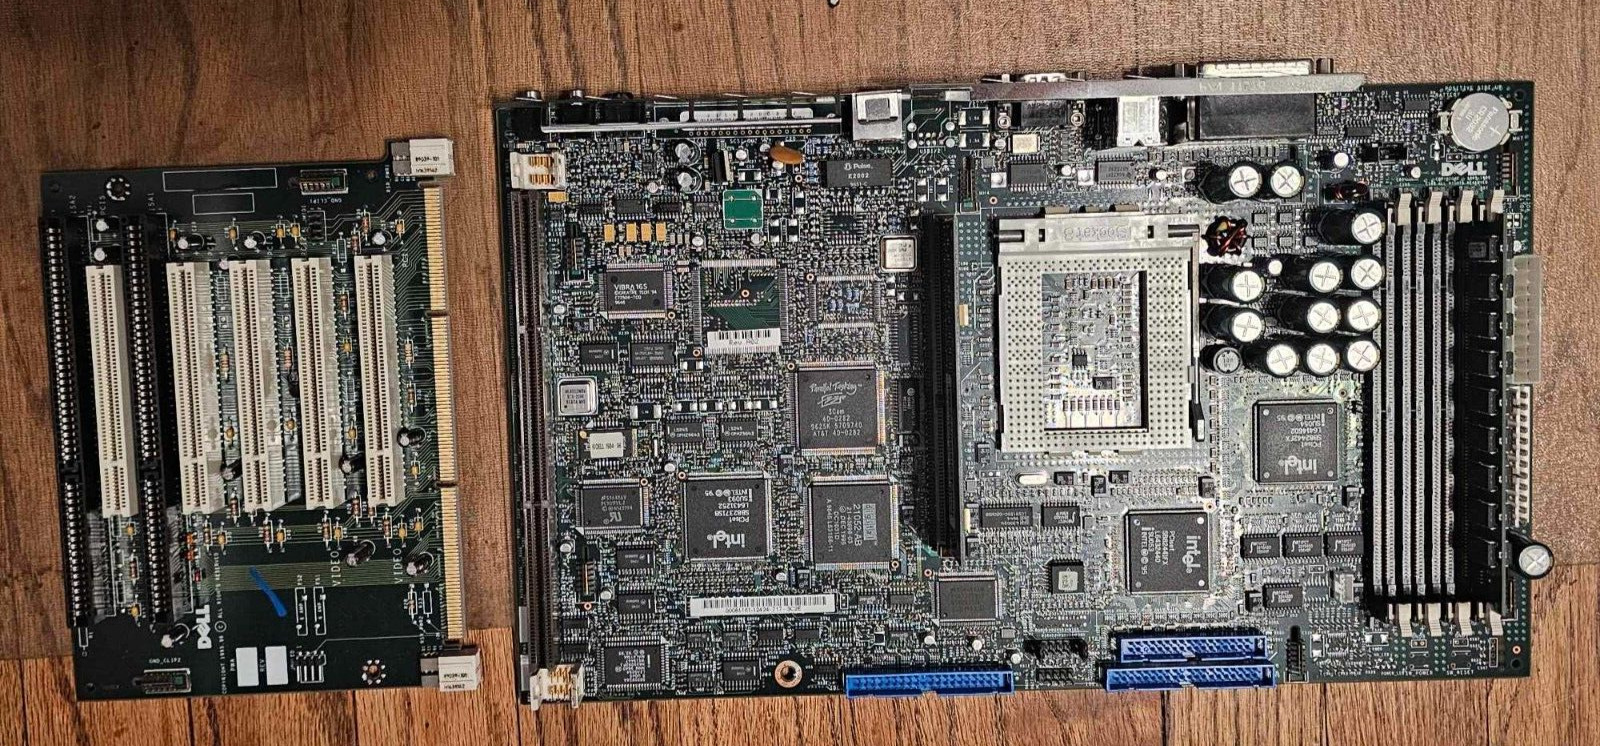 Vintage Retro Dell Optiplex GX Pro/200 Socket8 Motherboard Tested Working Clean